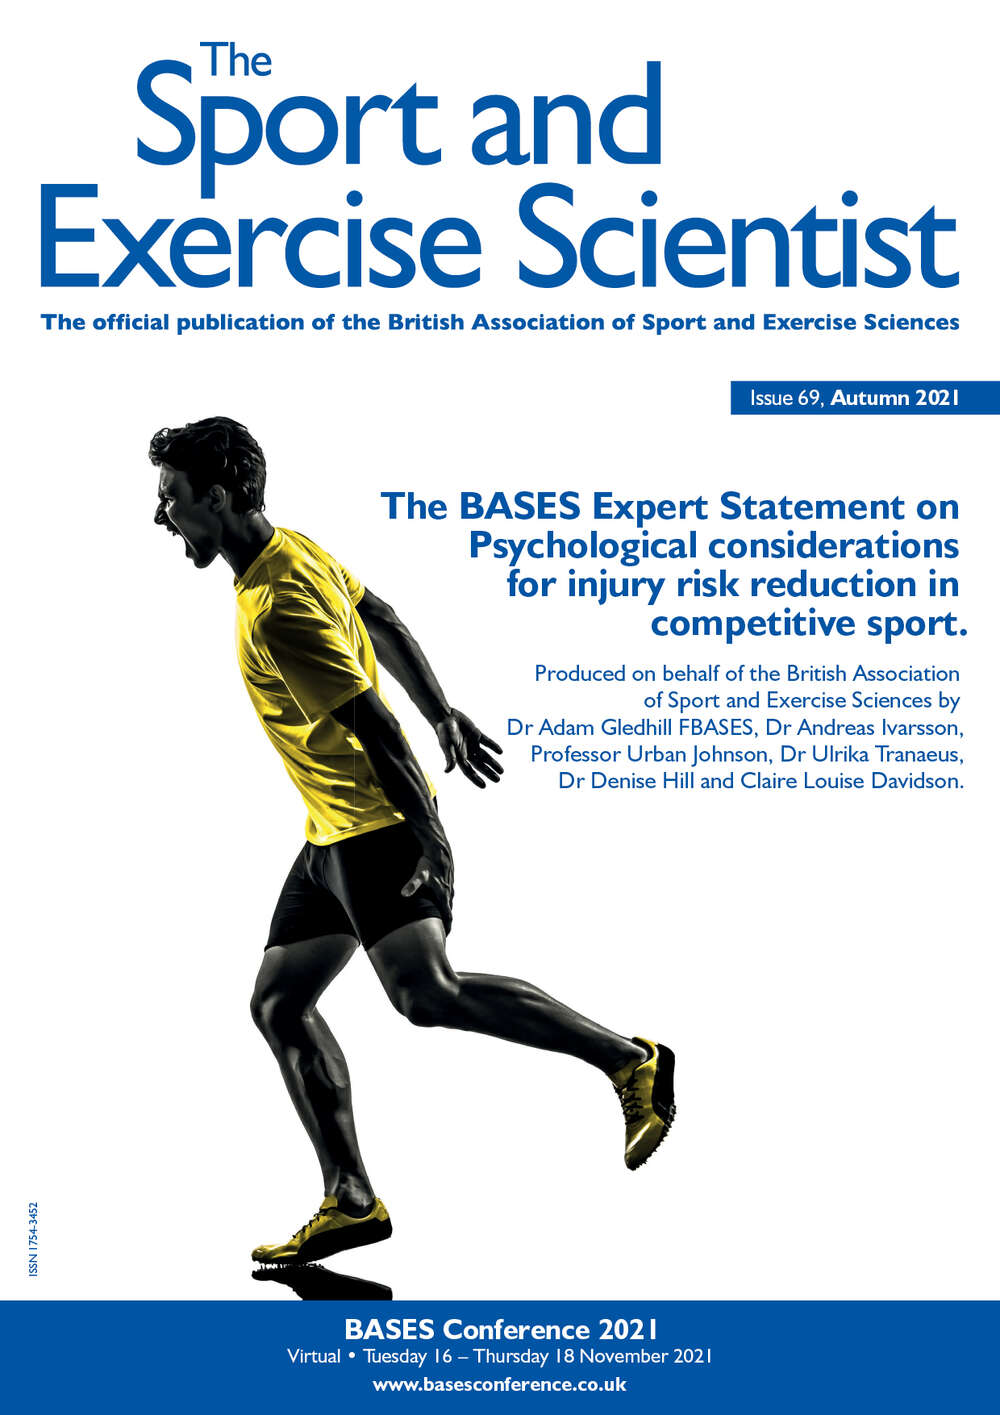 Advertise in The Sport and Exercise Scientist Spring 2022 issue